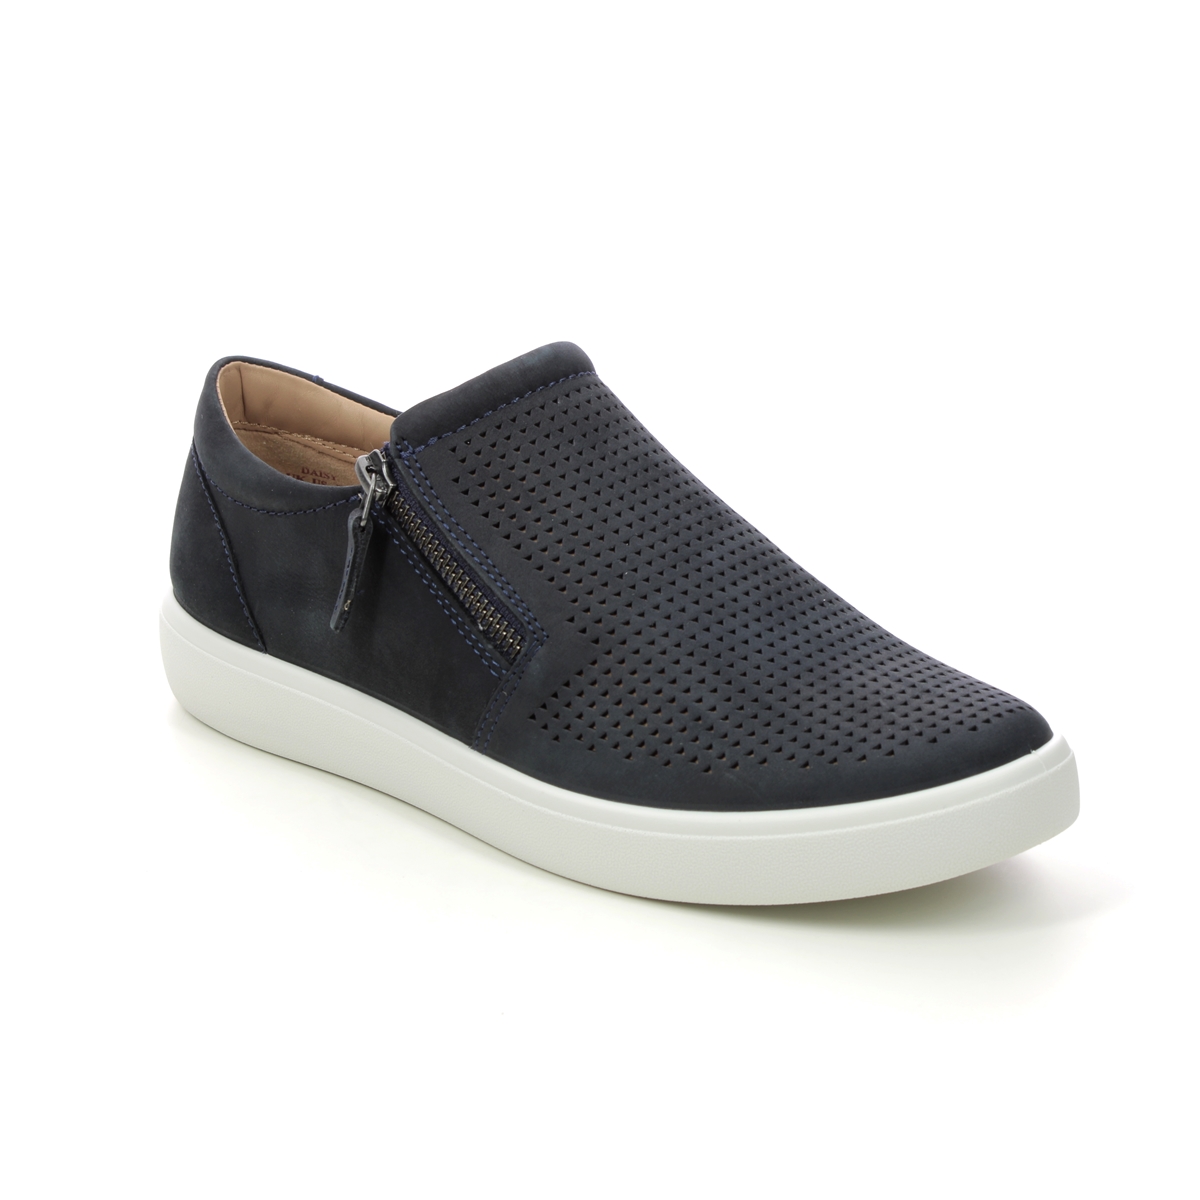 Hotter Daisy Wide Navy nubuck Womens Comfort Slip On Shoes 16215-73